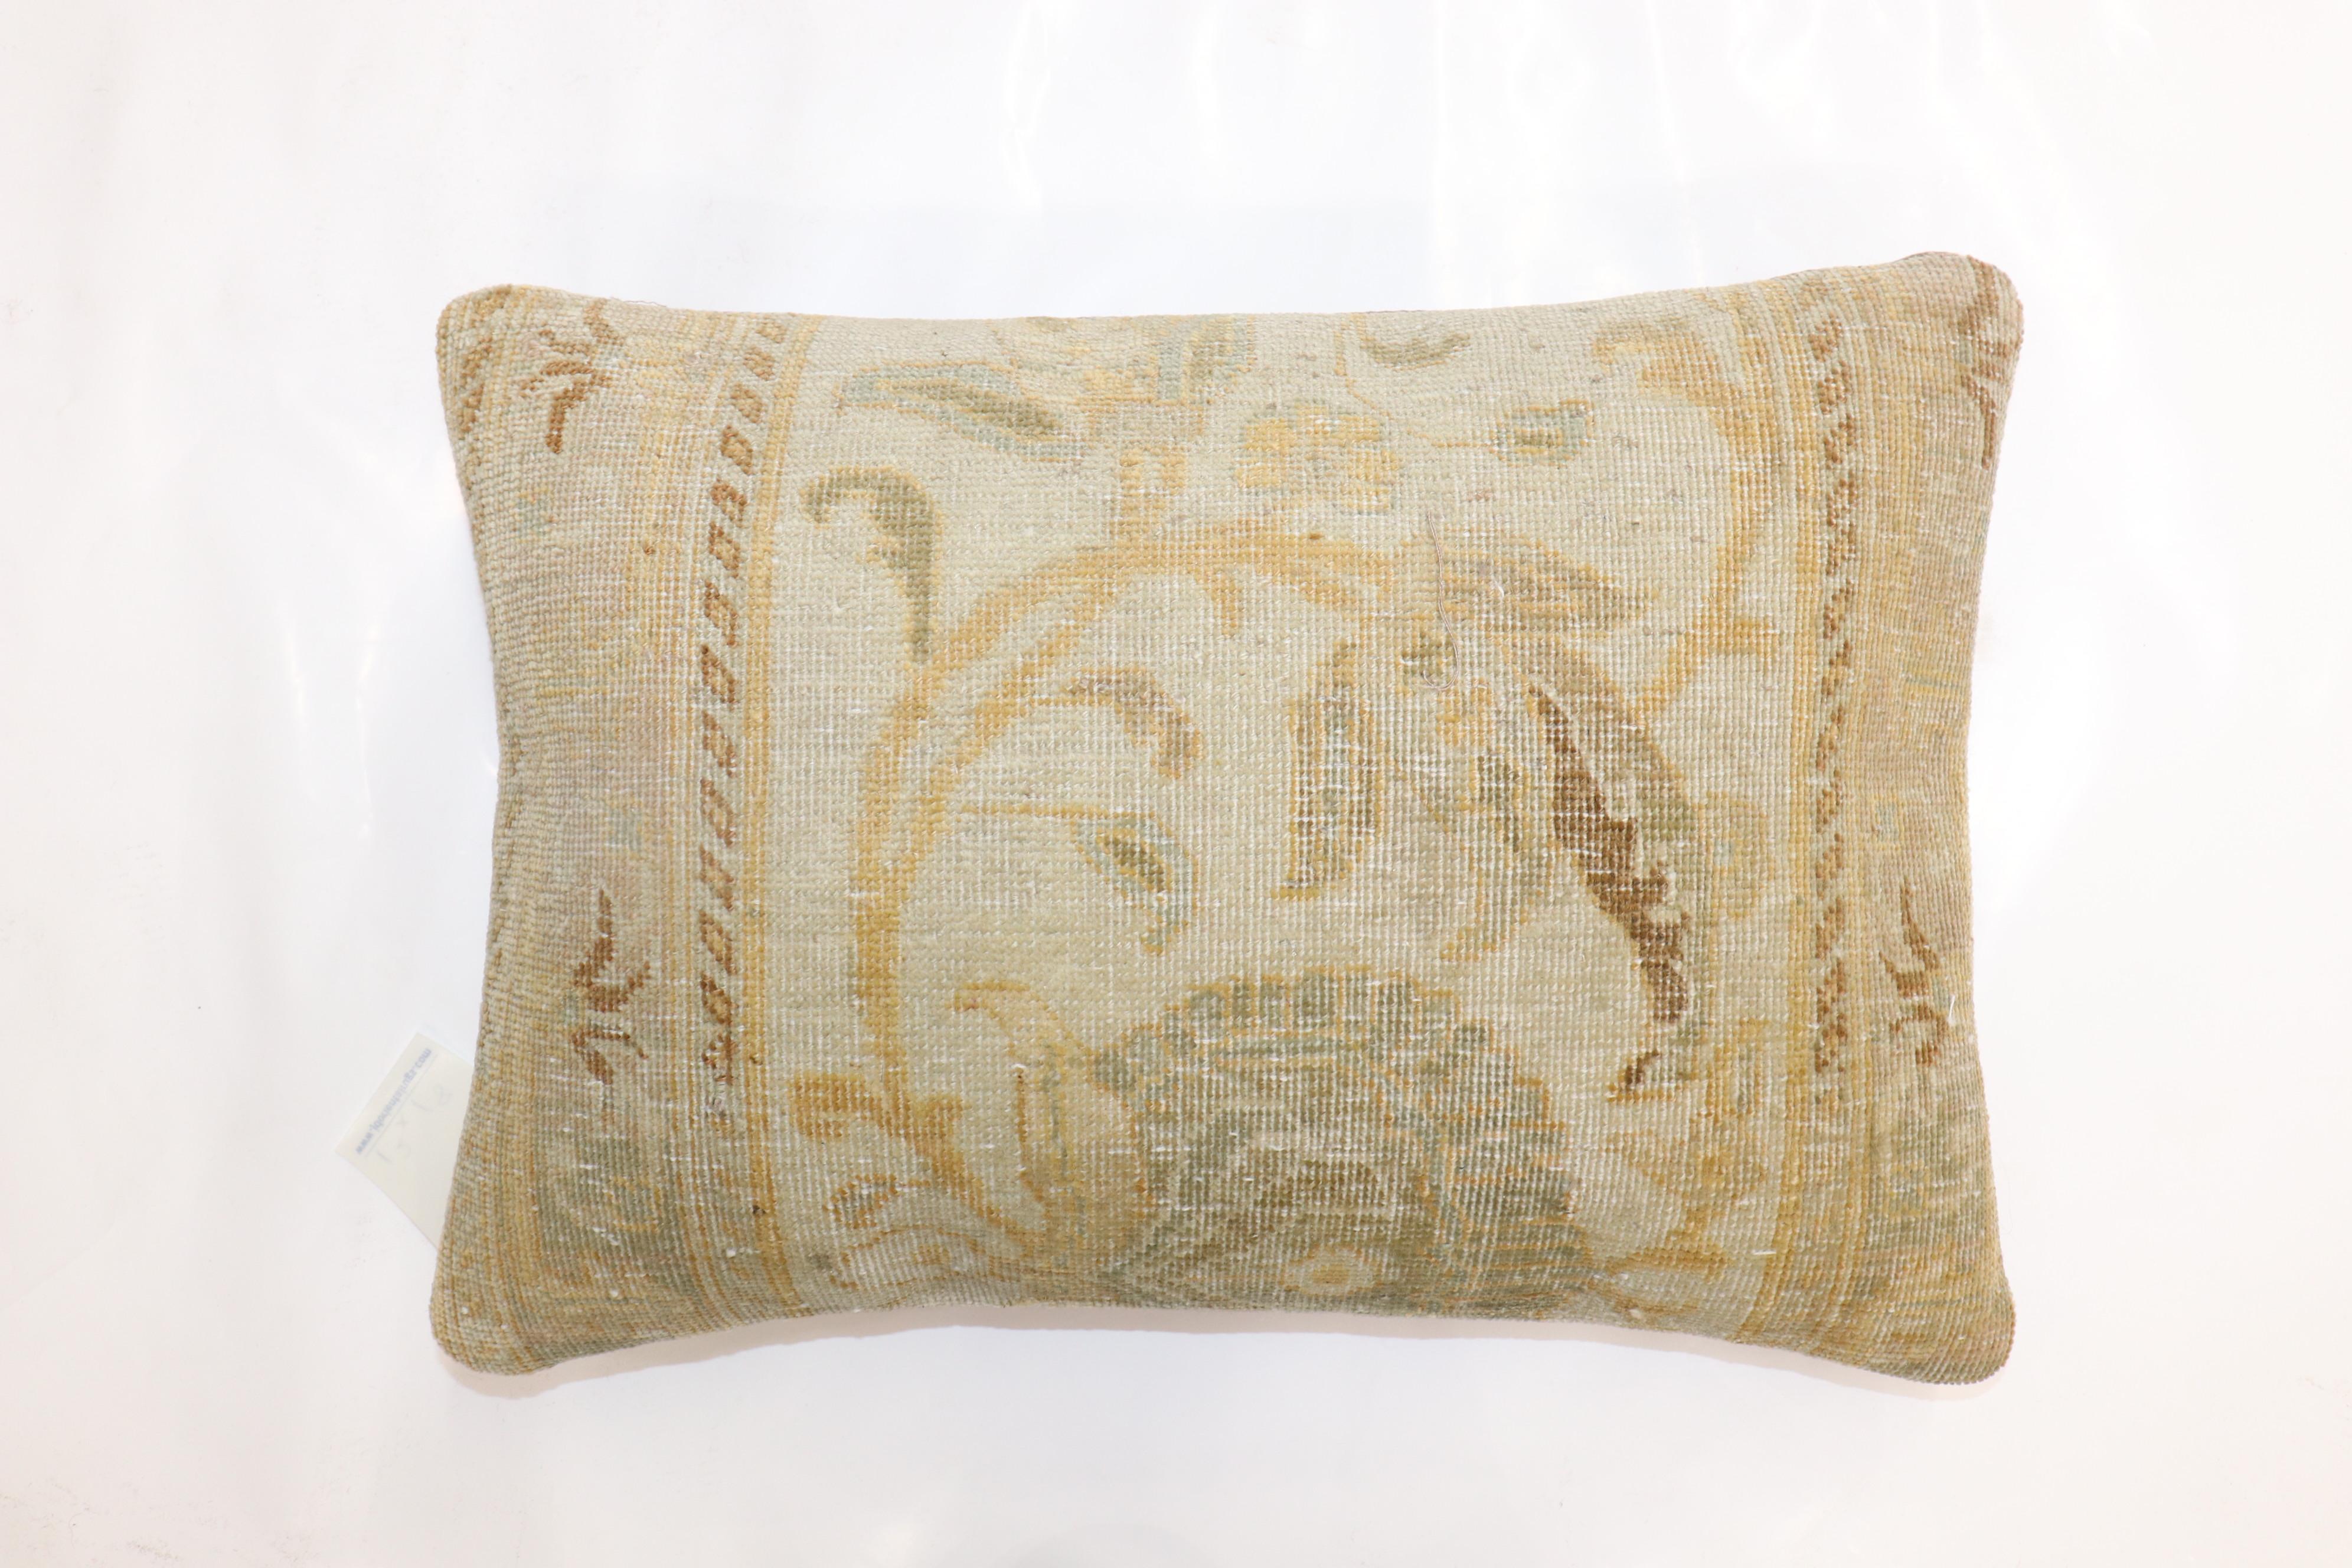 Bolster size pillow made from a finely woven gold color persian tabriz rug.

Measures: 14'' x 20''.